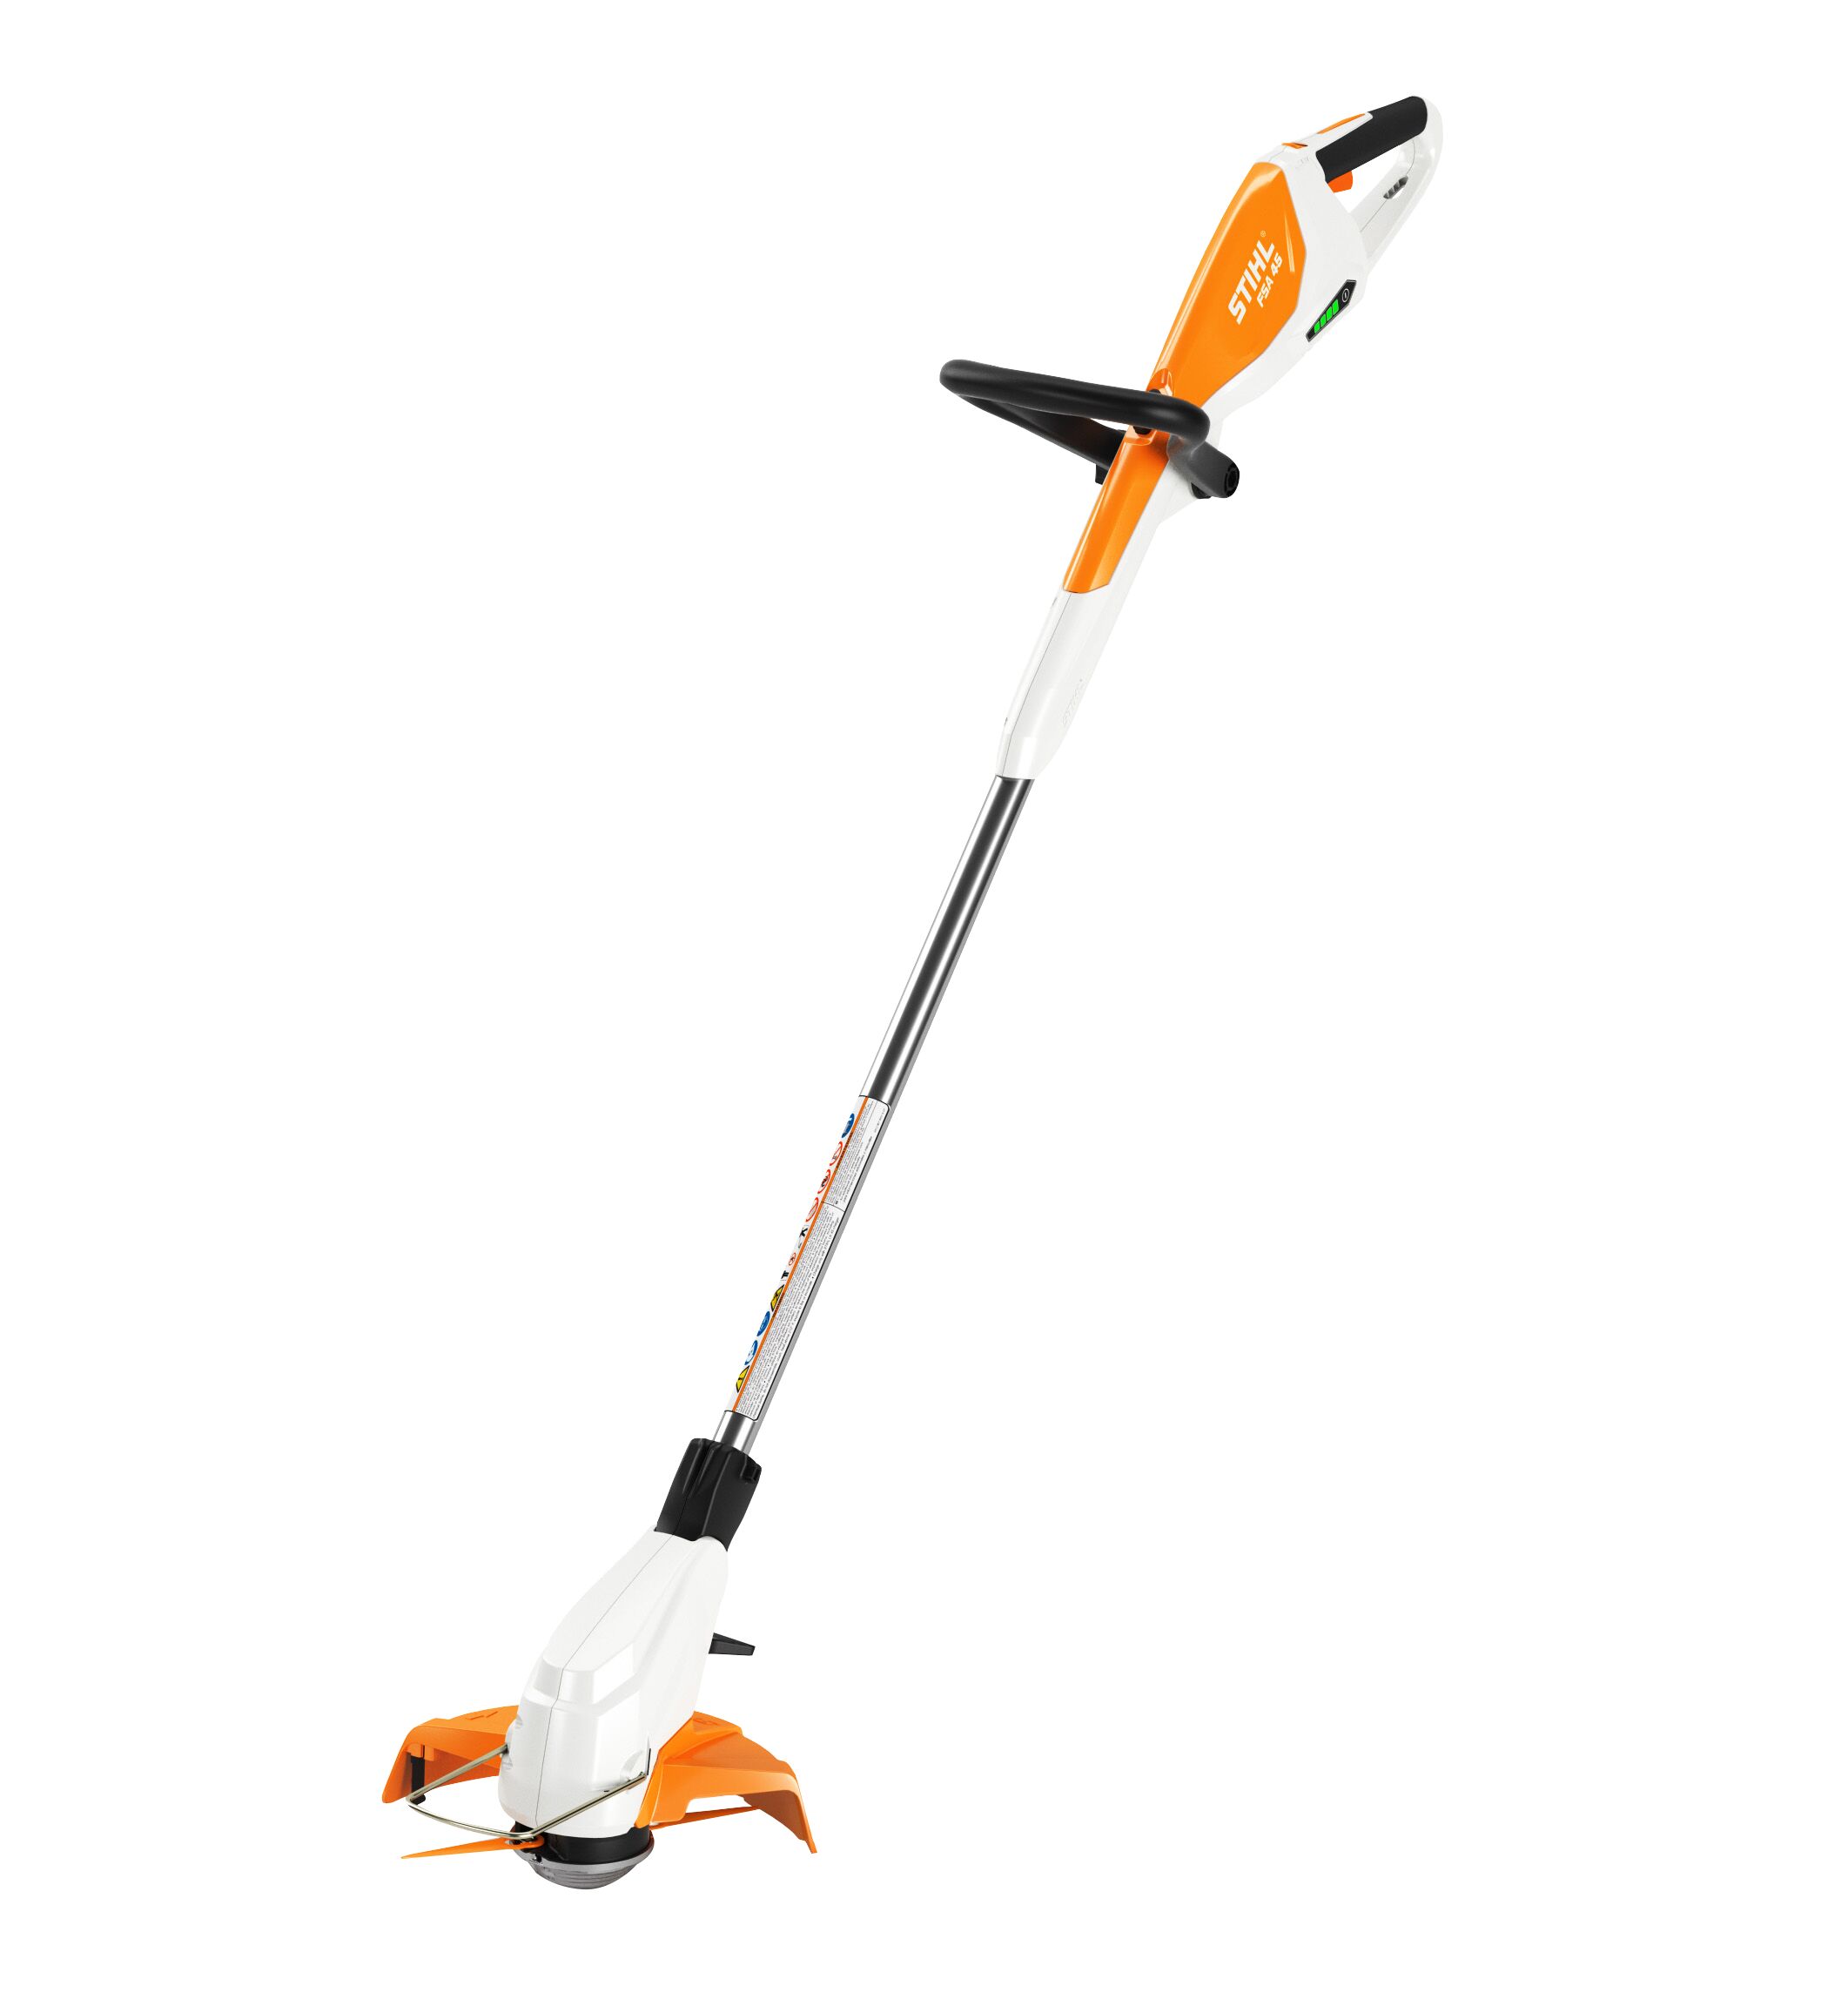 FSA 45 Battery-Powered Trimmer with Adjustable Shaft and Built-In Battery